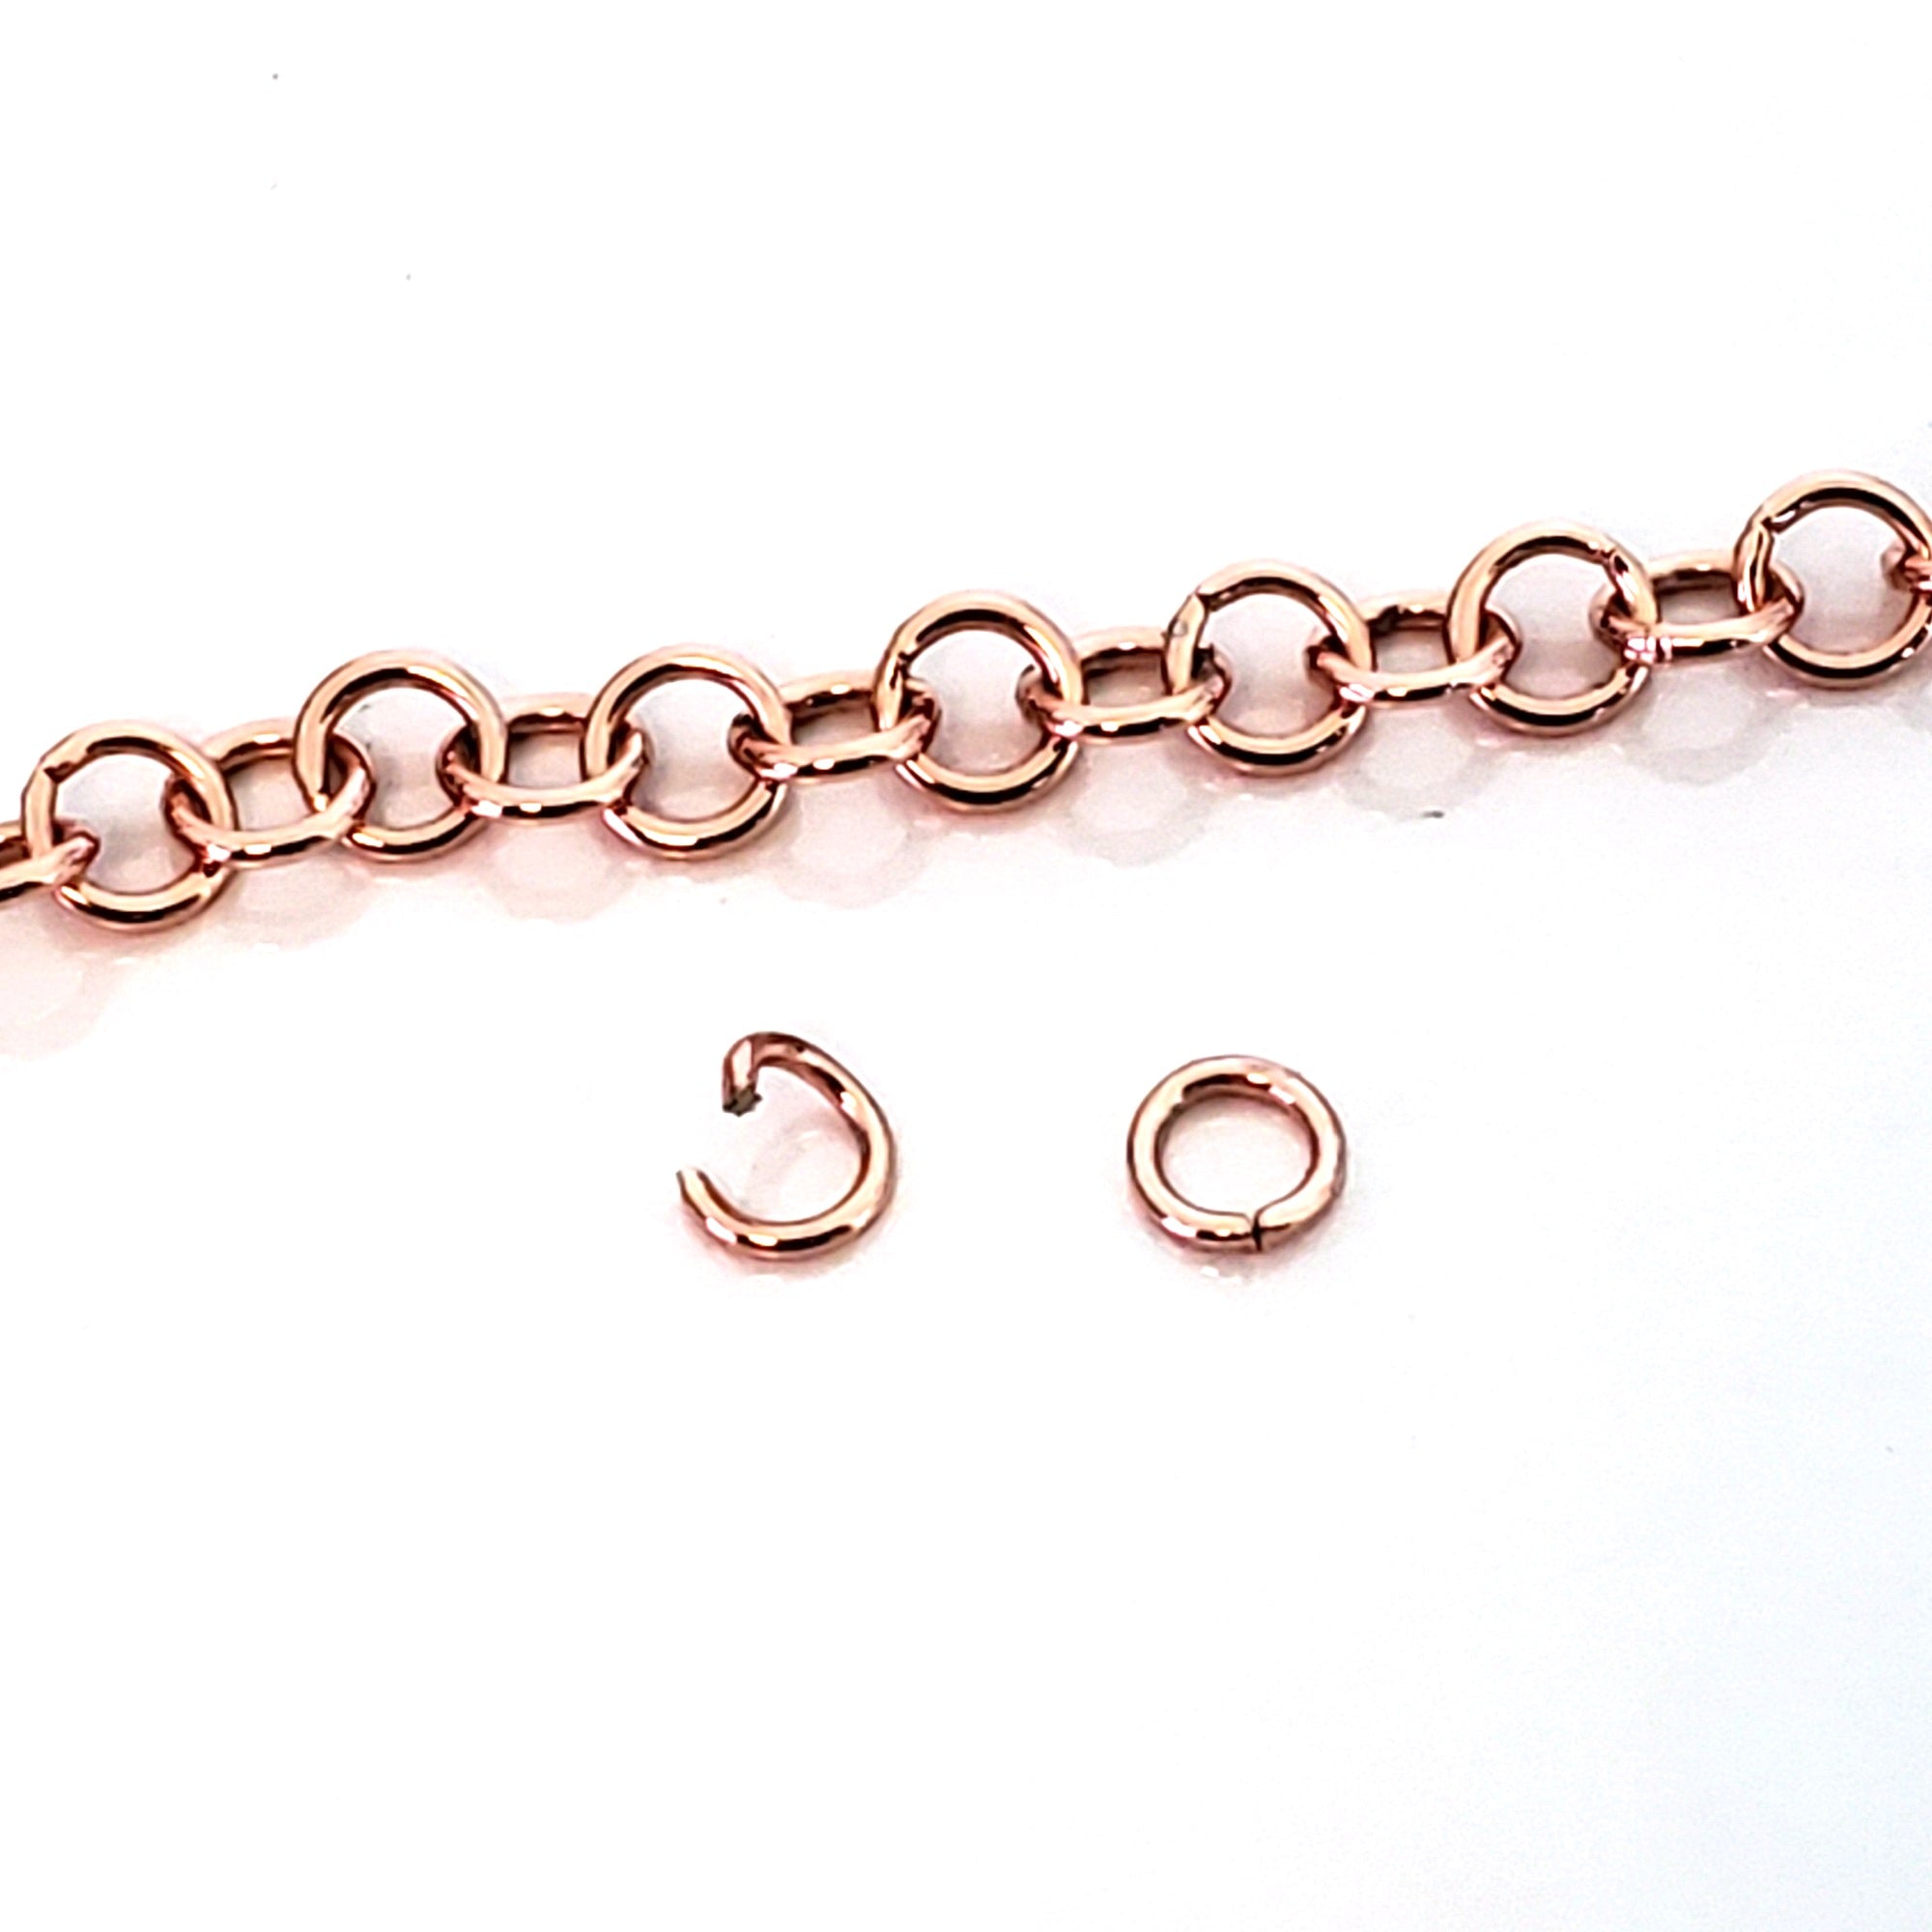 Rose gold stainless steel jump rings 7mm or 8mm - Jewelry findings